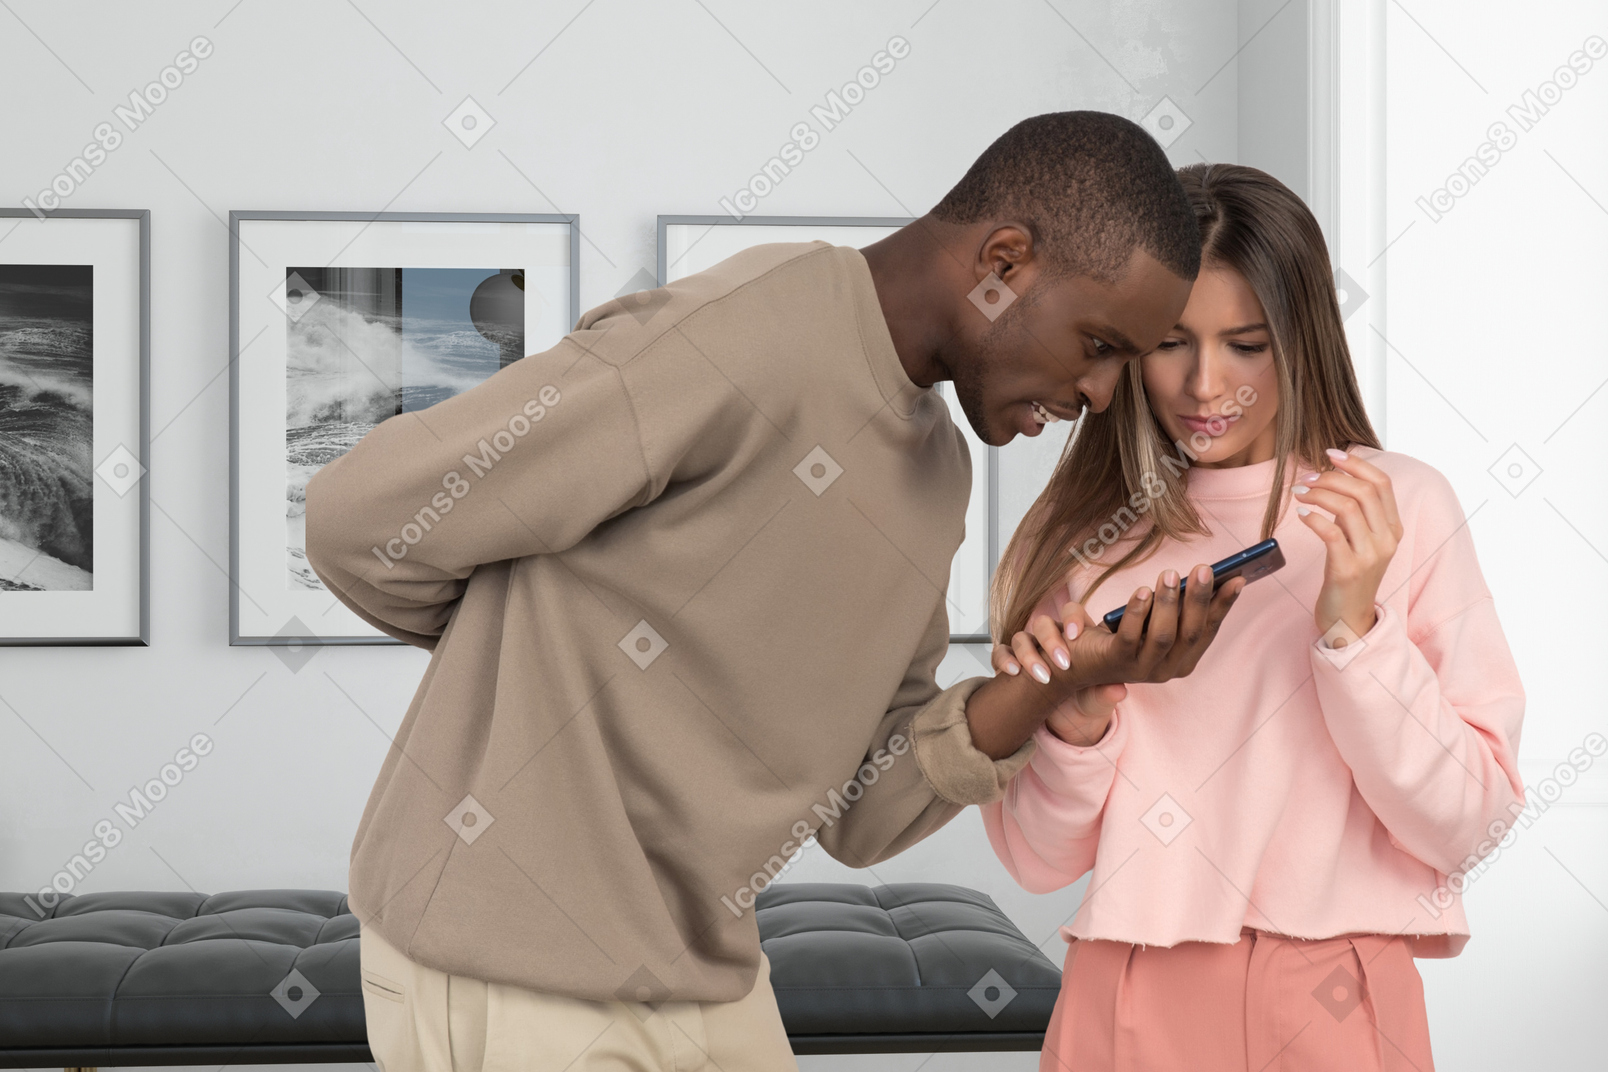 A man and a woman looking at a cell phone